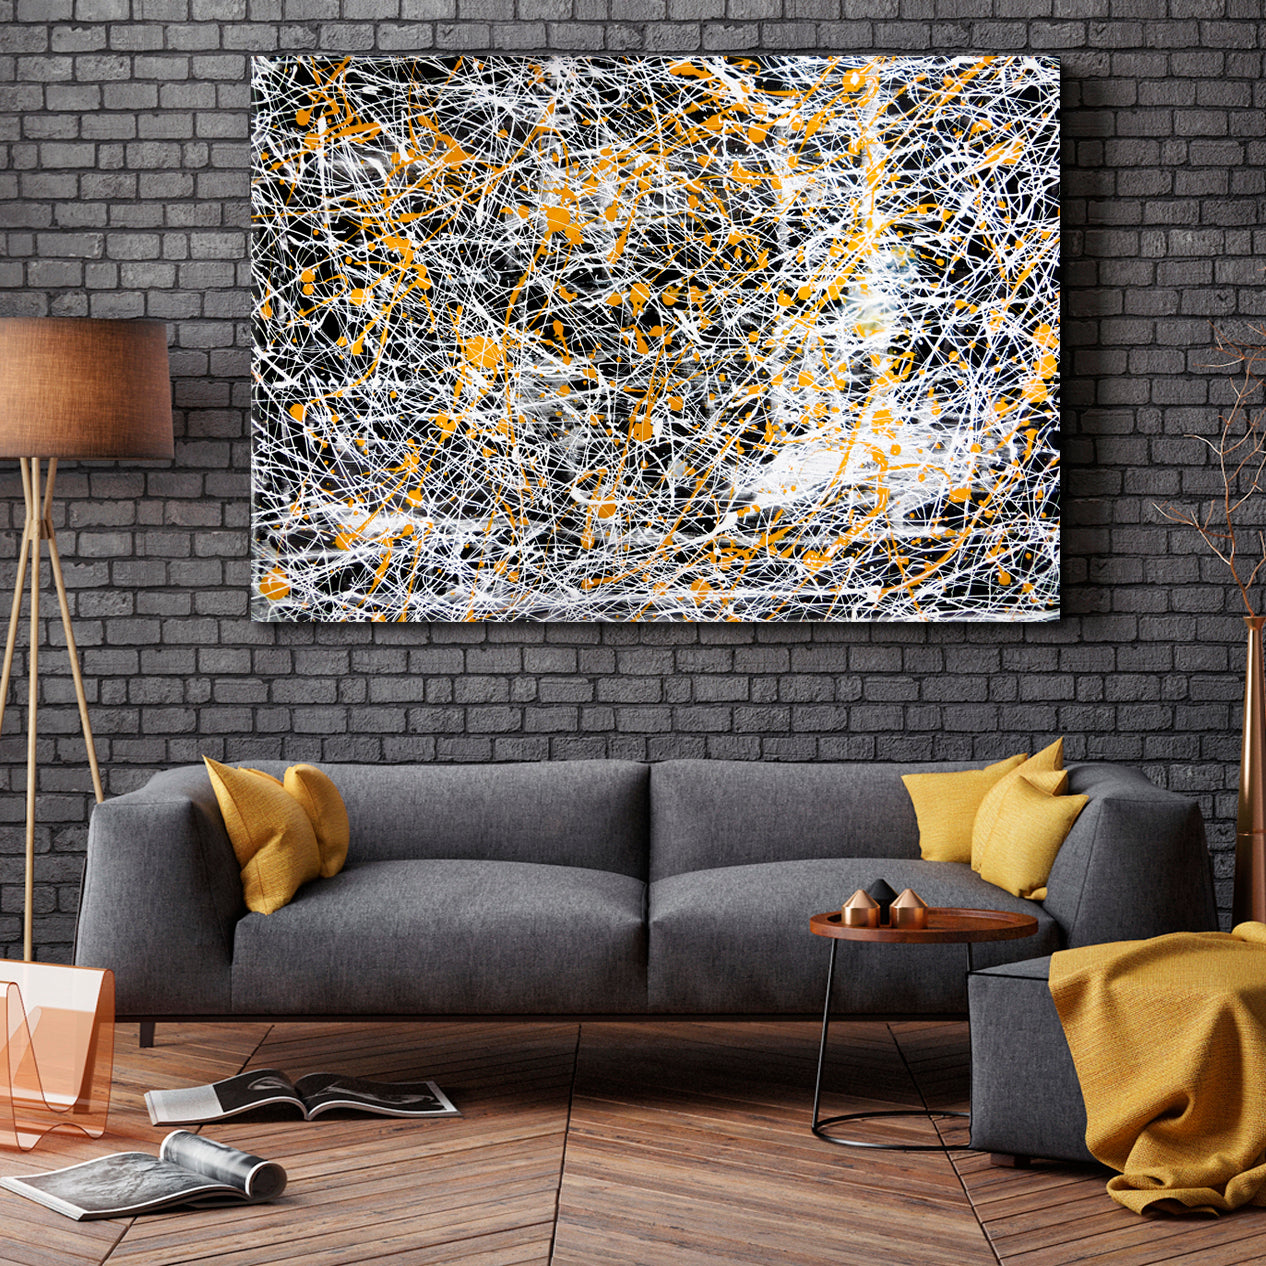 Abstract Drip White Black Yellow Modern Expressionist Contemporary Art Artesty 1 panel 24" x 16" 